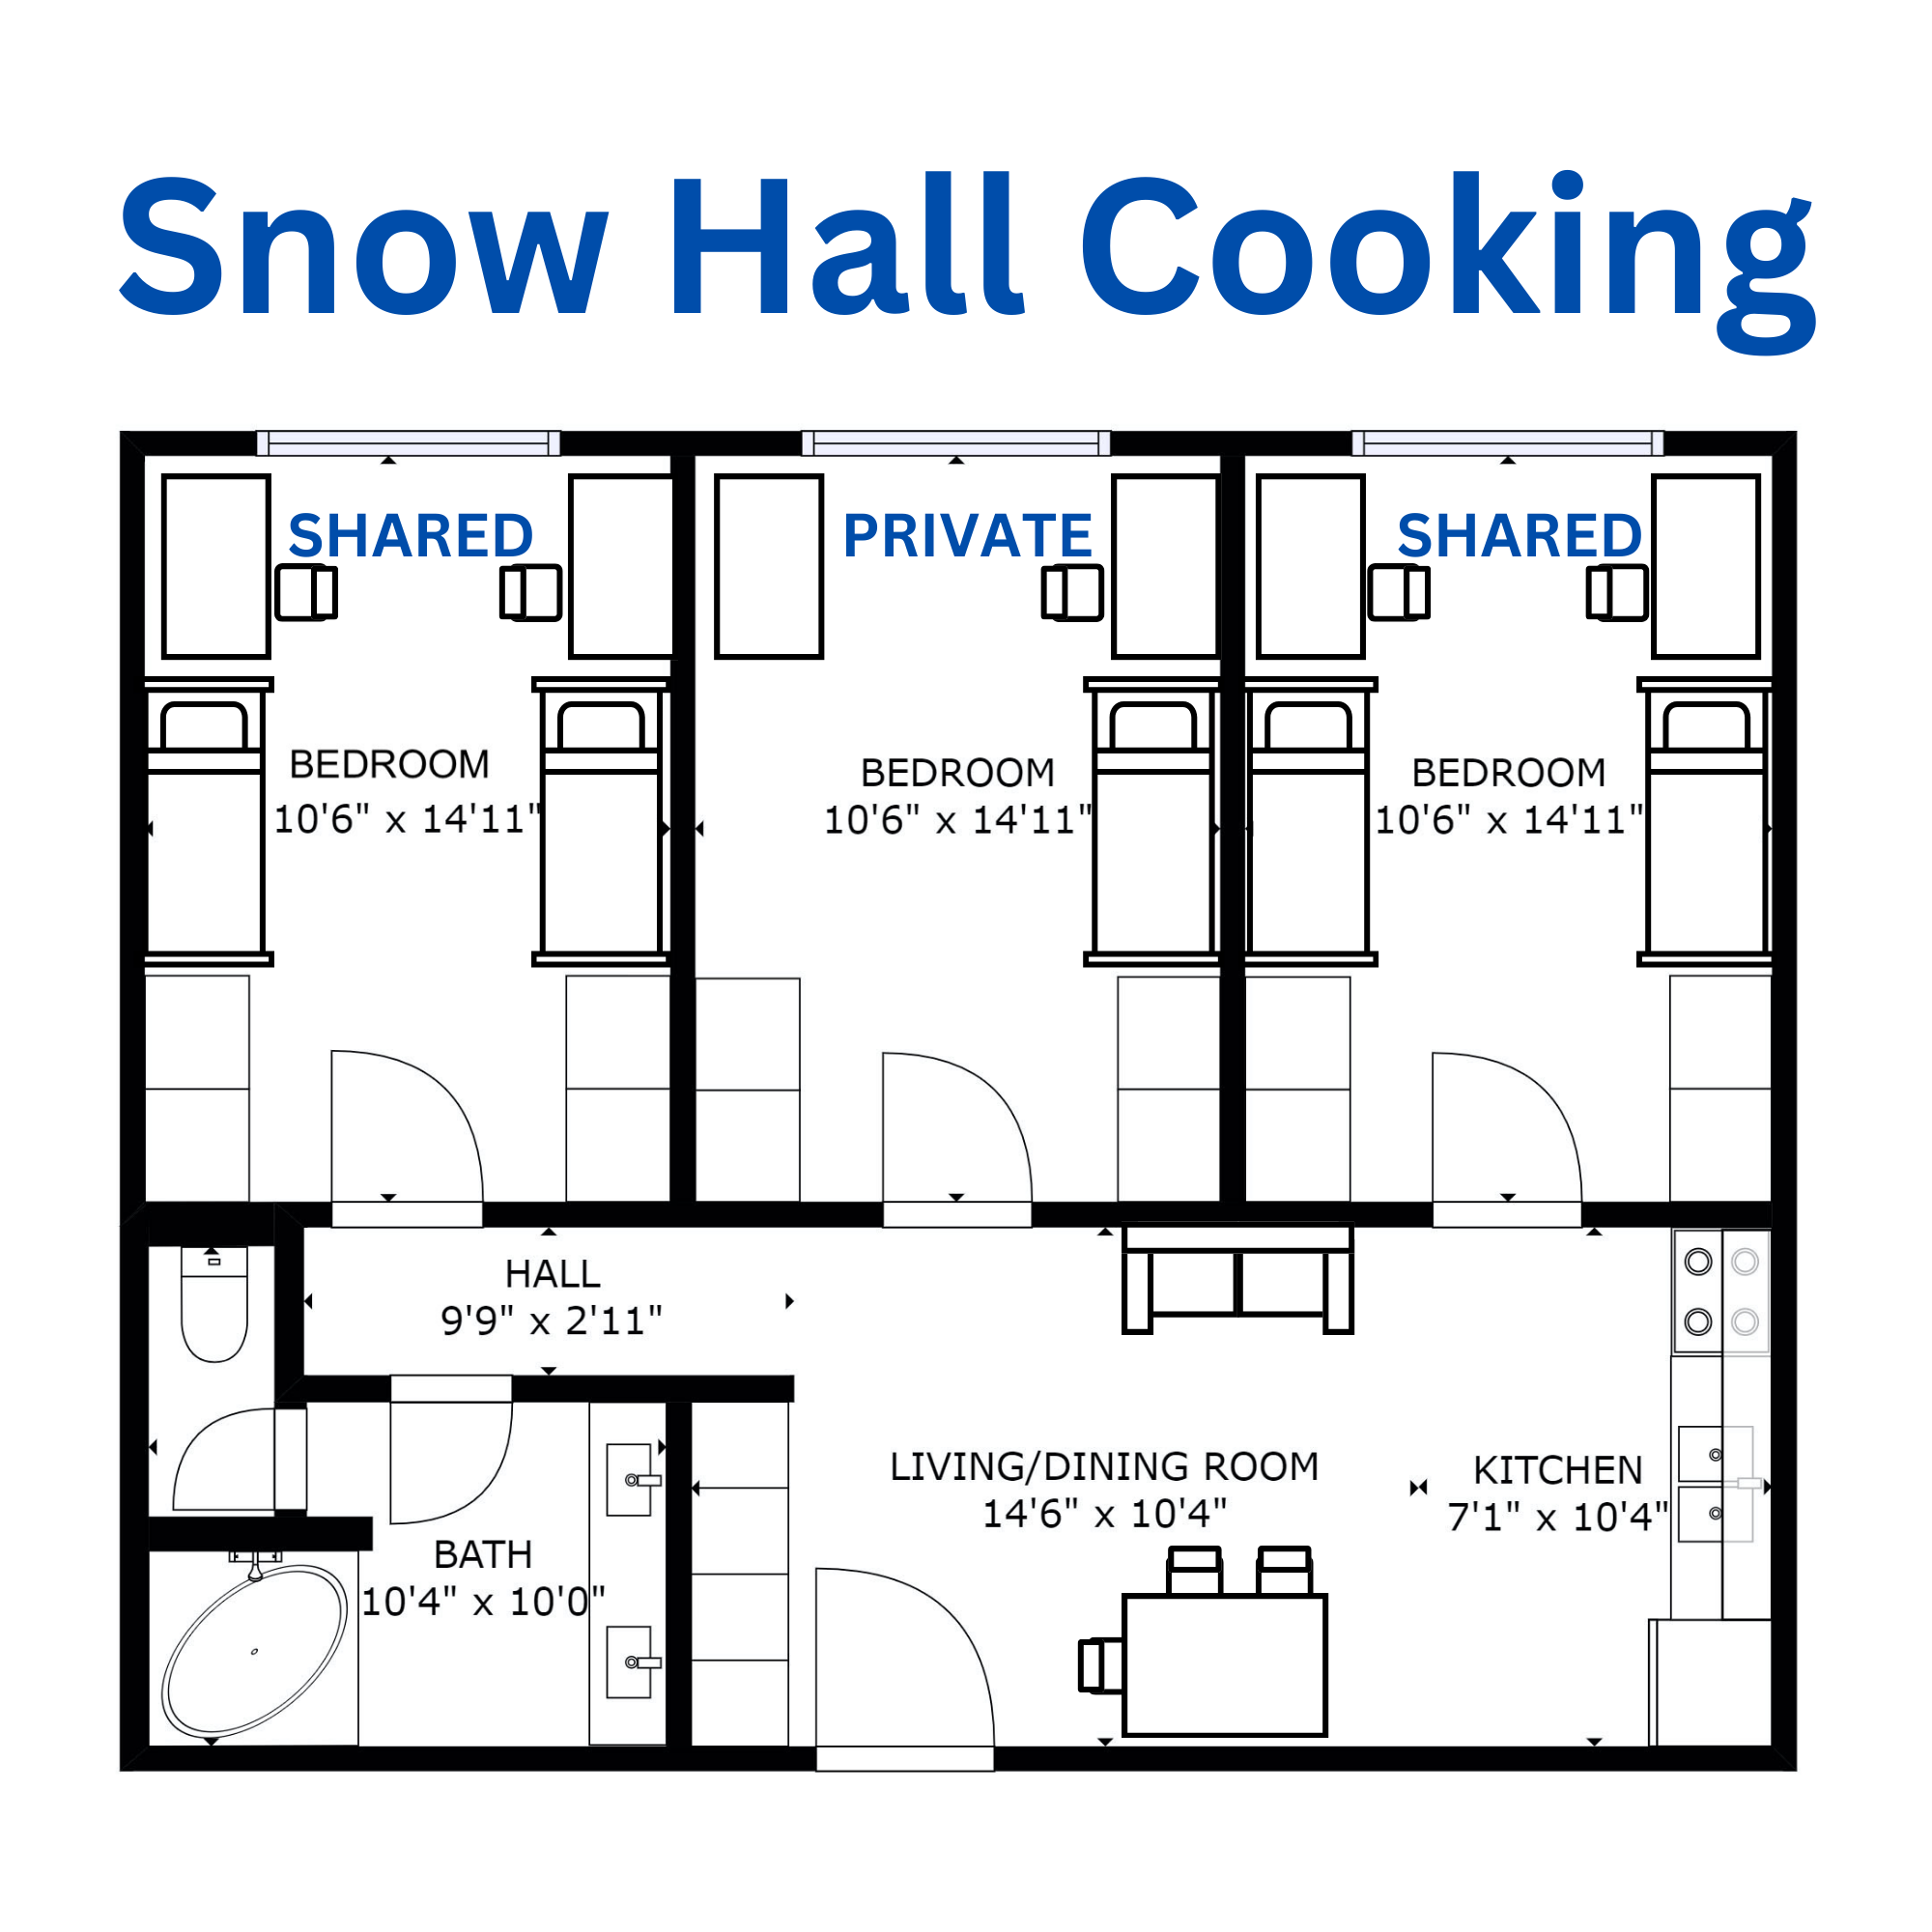 Snow Hall Cooking Apartment Floor Plan